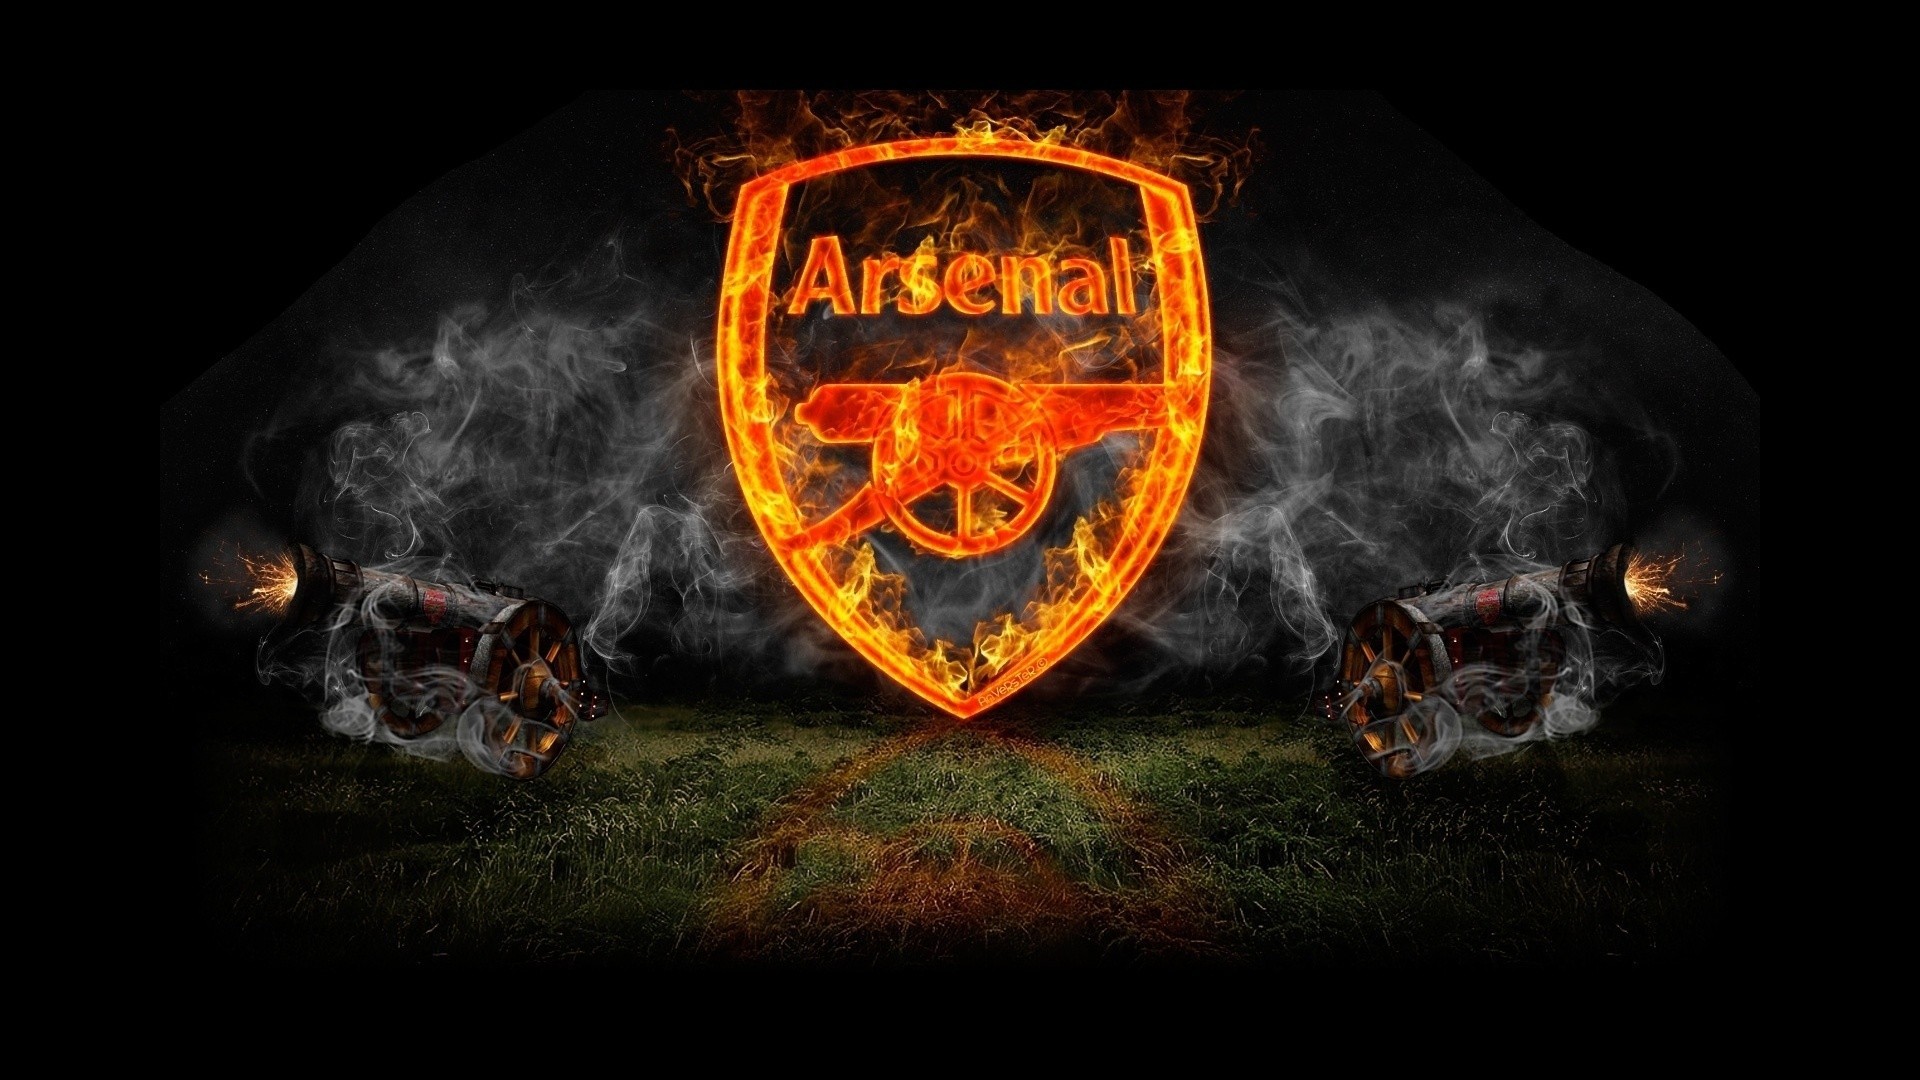 General 1920x1080 Arsenal London logo cannons sport soccer clubs soccer